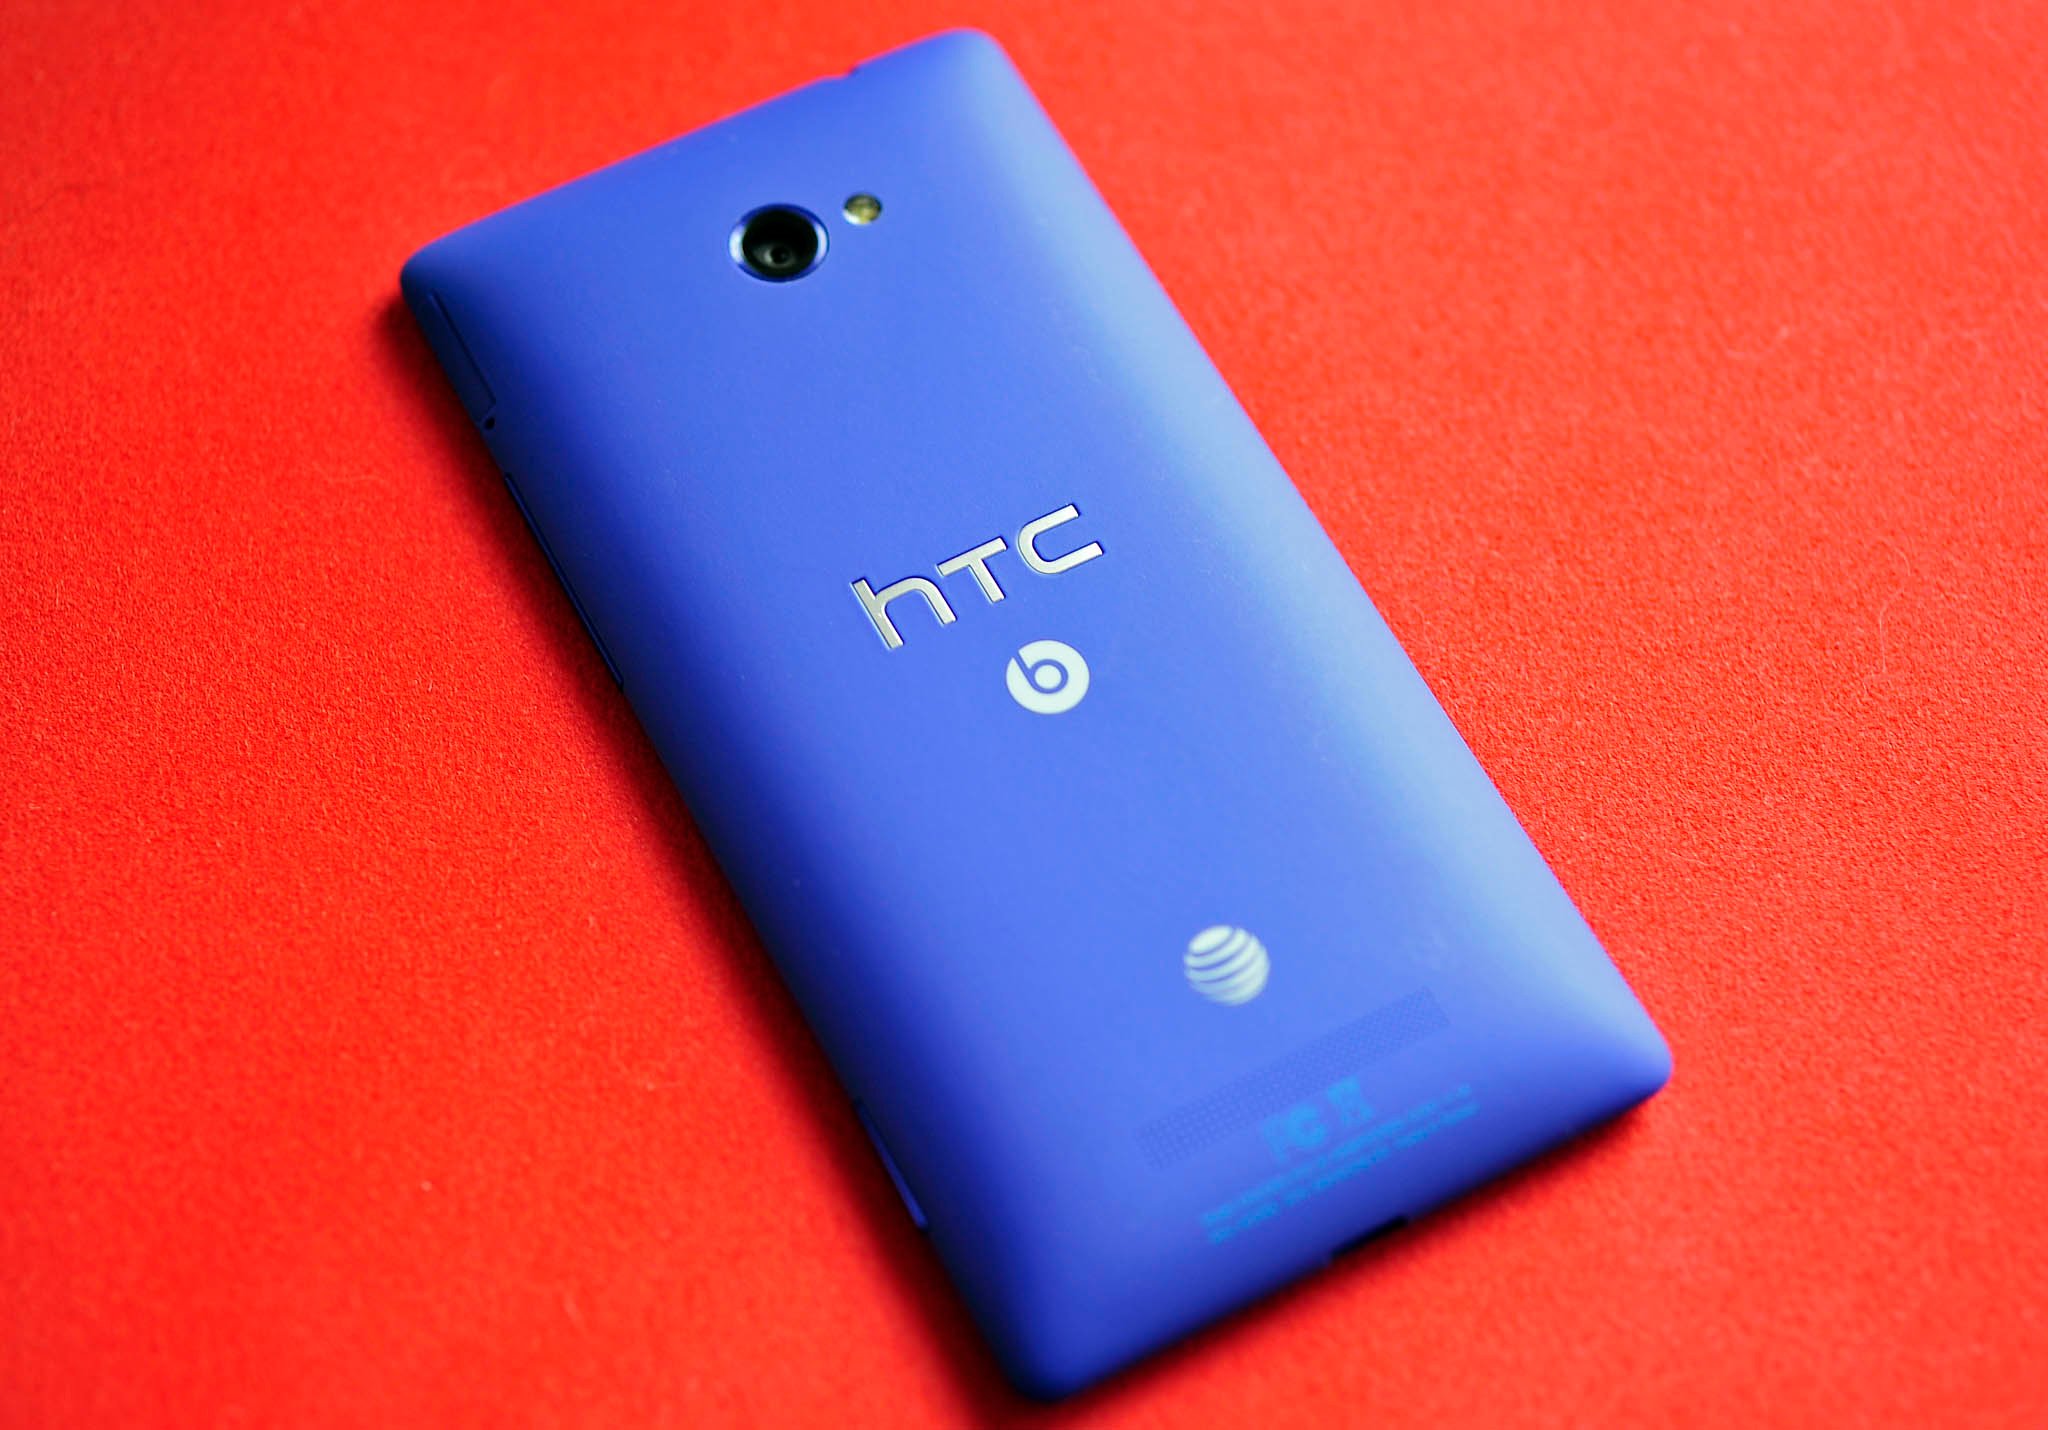 HTC 8X stuck on Windows 10 Mobile build 10536? You can now roll back with Windows Device Revoery Tool